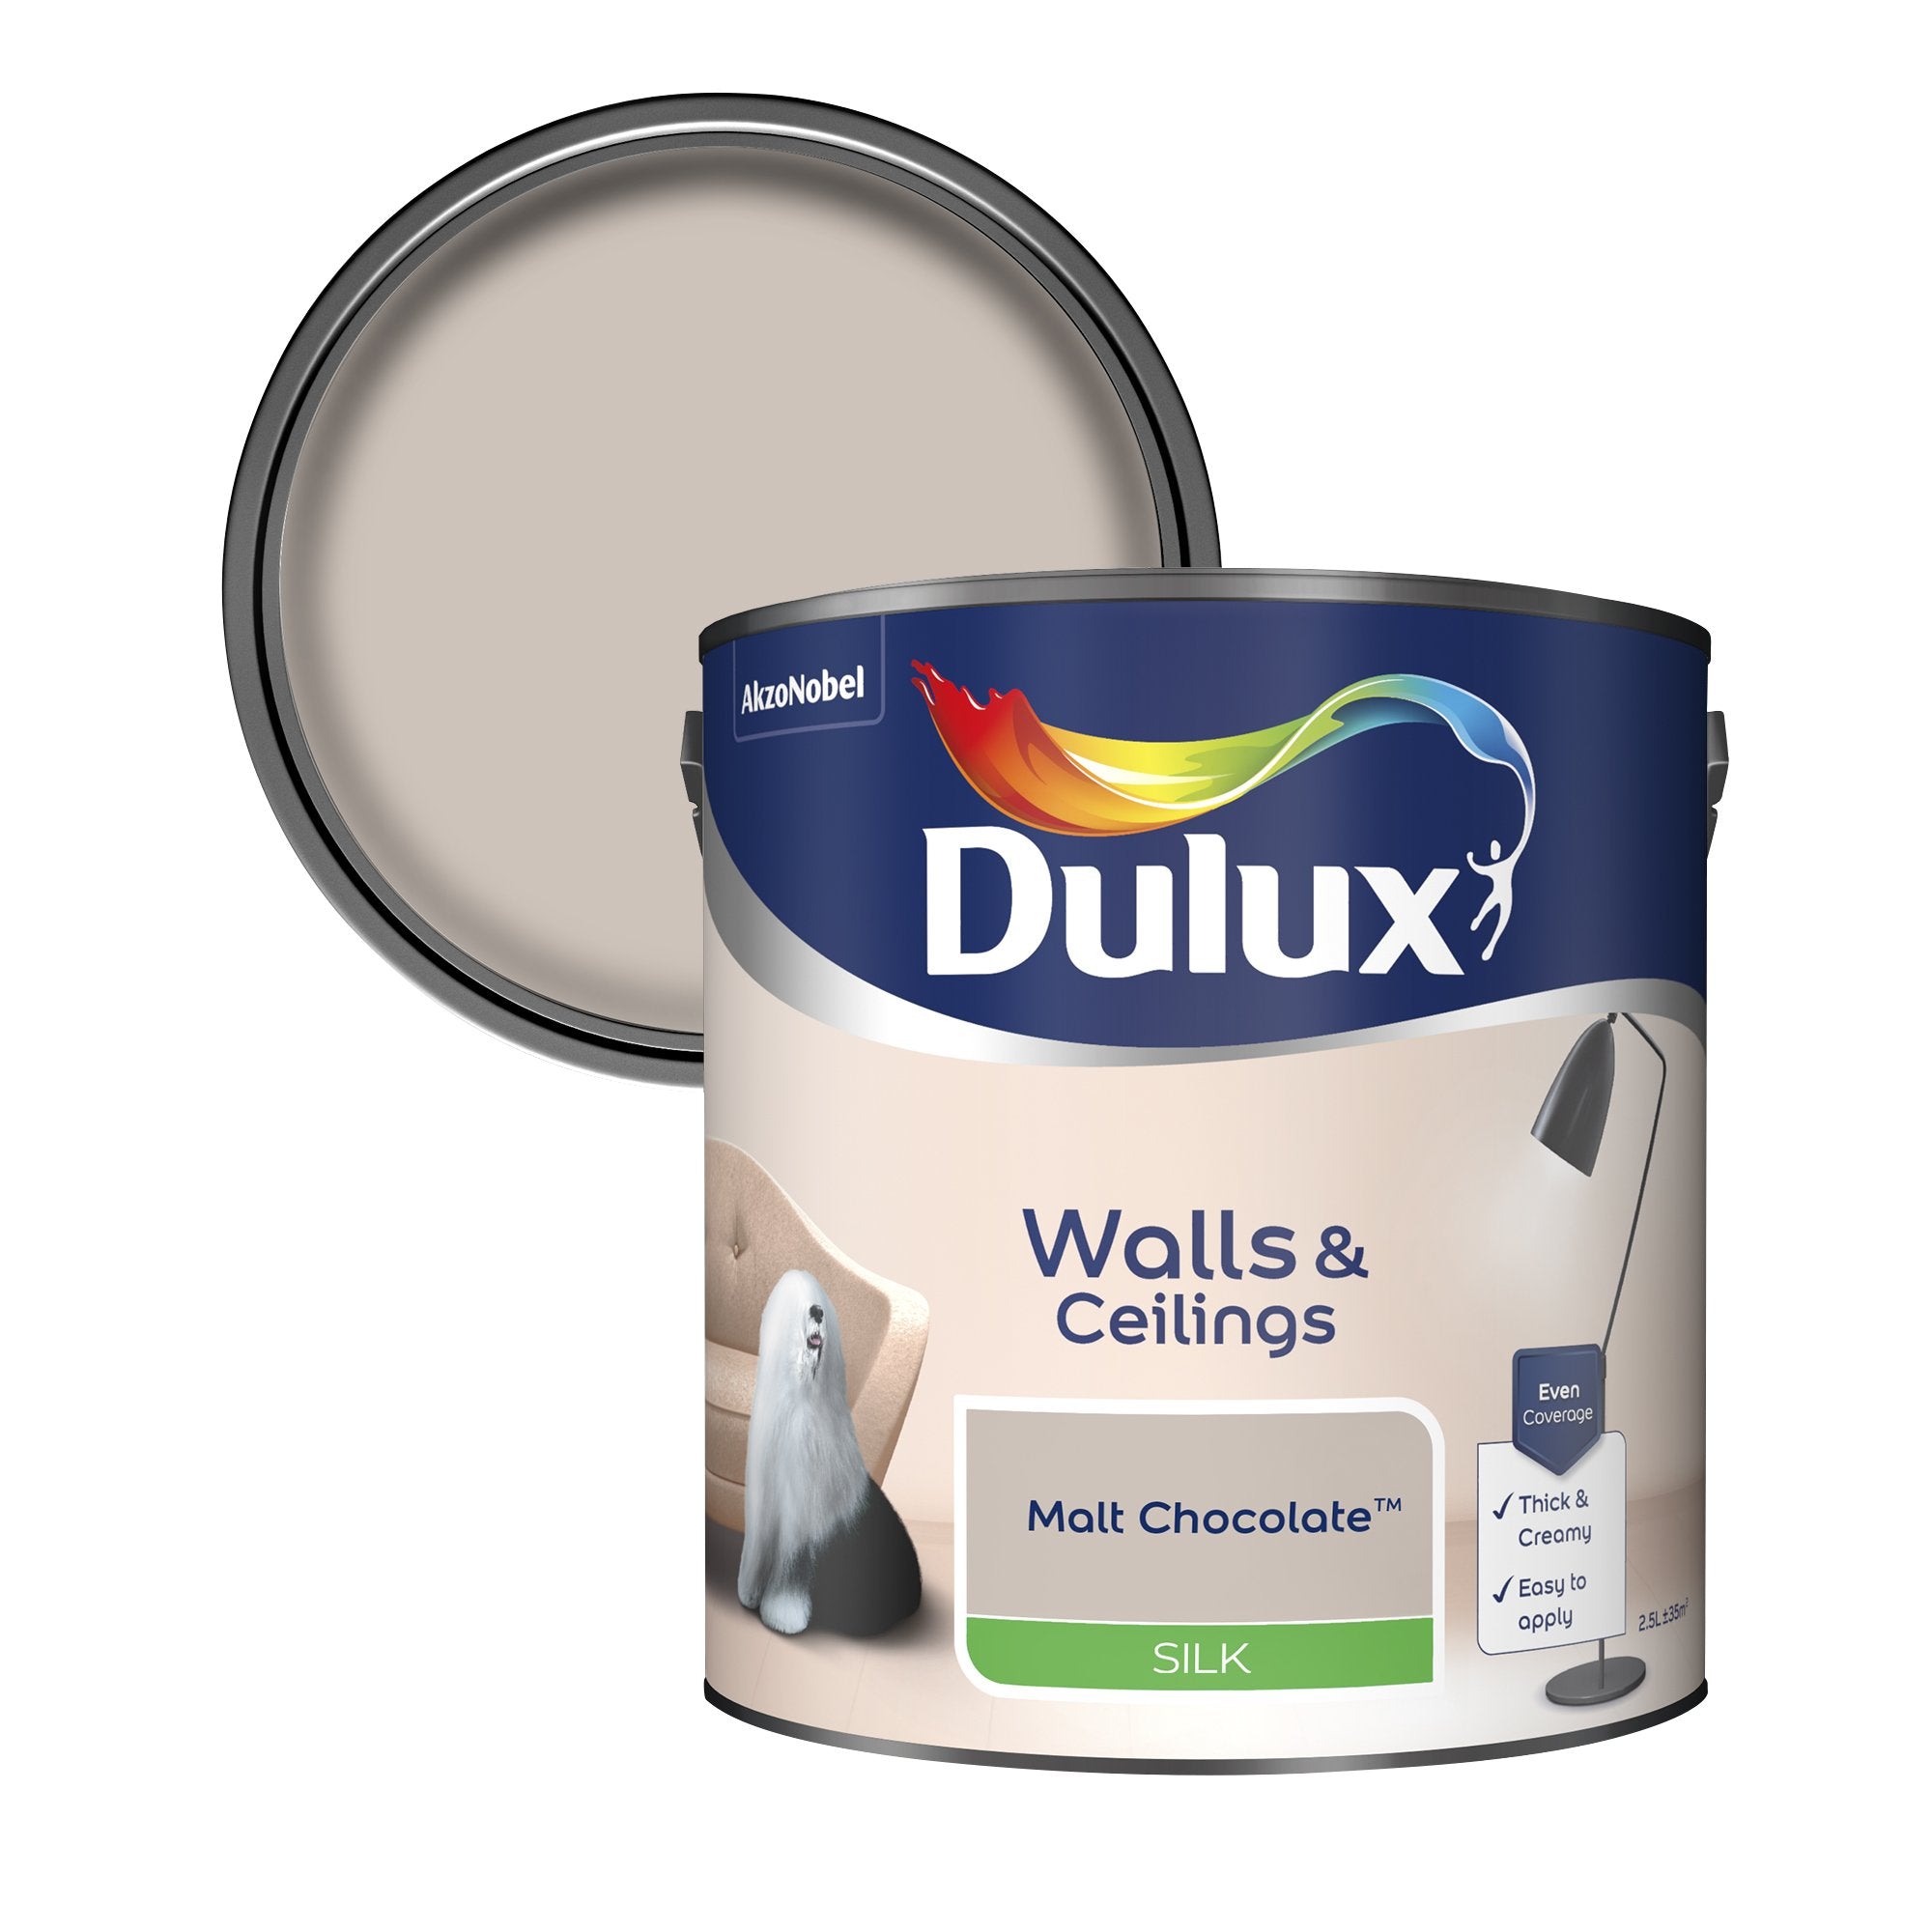 Dulux-Silk-Emulsion-Paint-For-Walls-And-Ceilings-Malt-Chocolate-2.5L